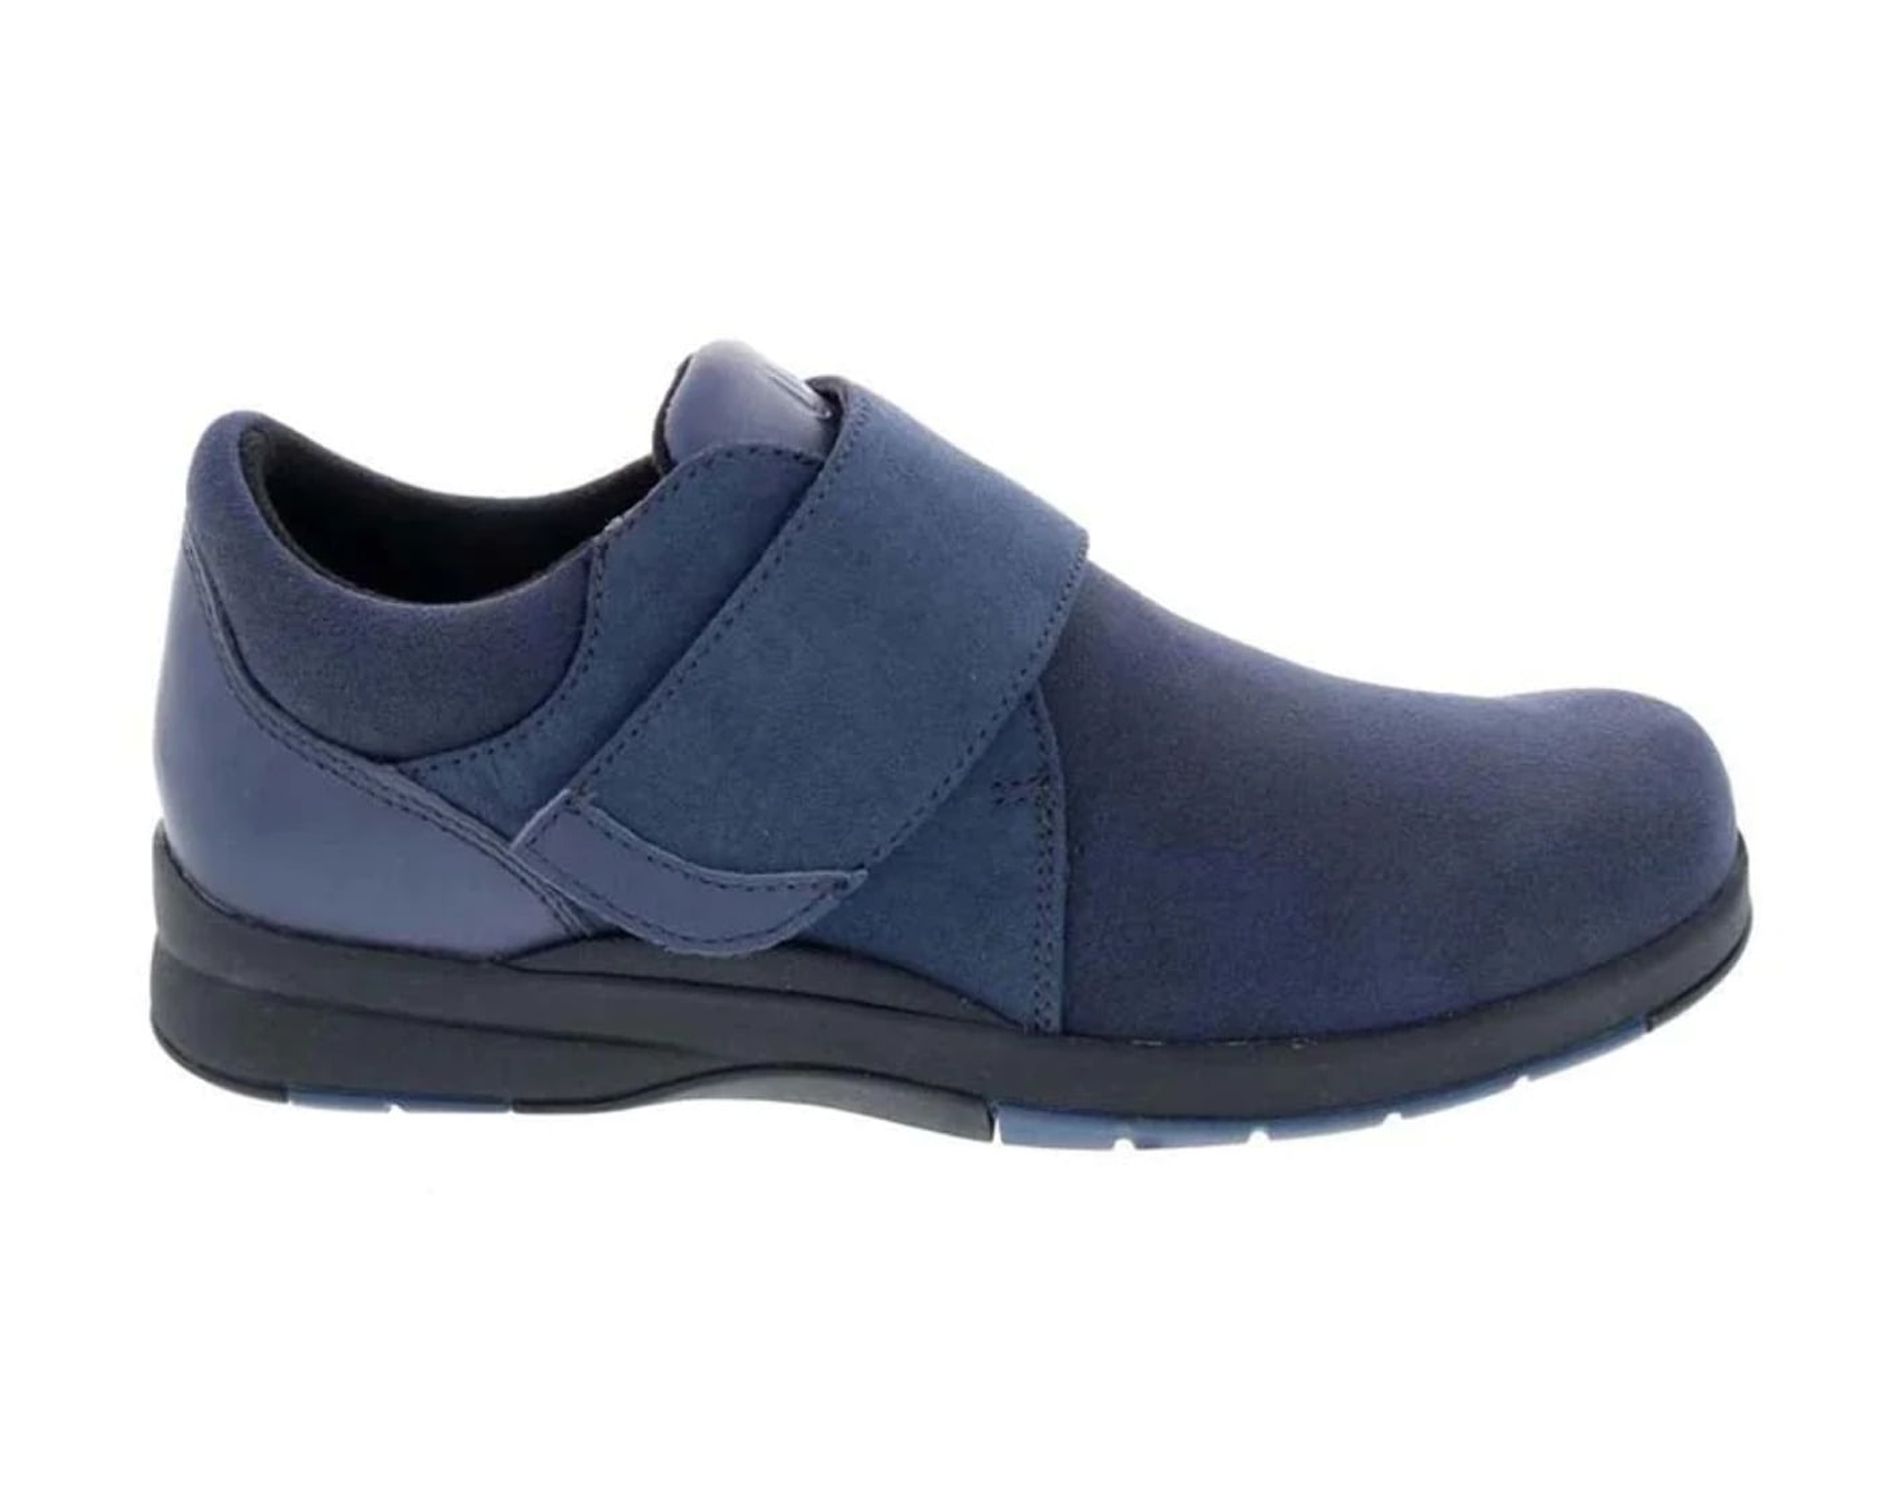 DREW MOONWALK WOMEN CASUAL SHOE IN NAVY STRETCH LEATHER - image 4 of 4